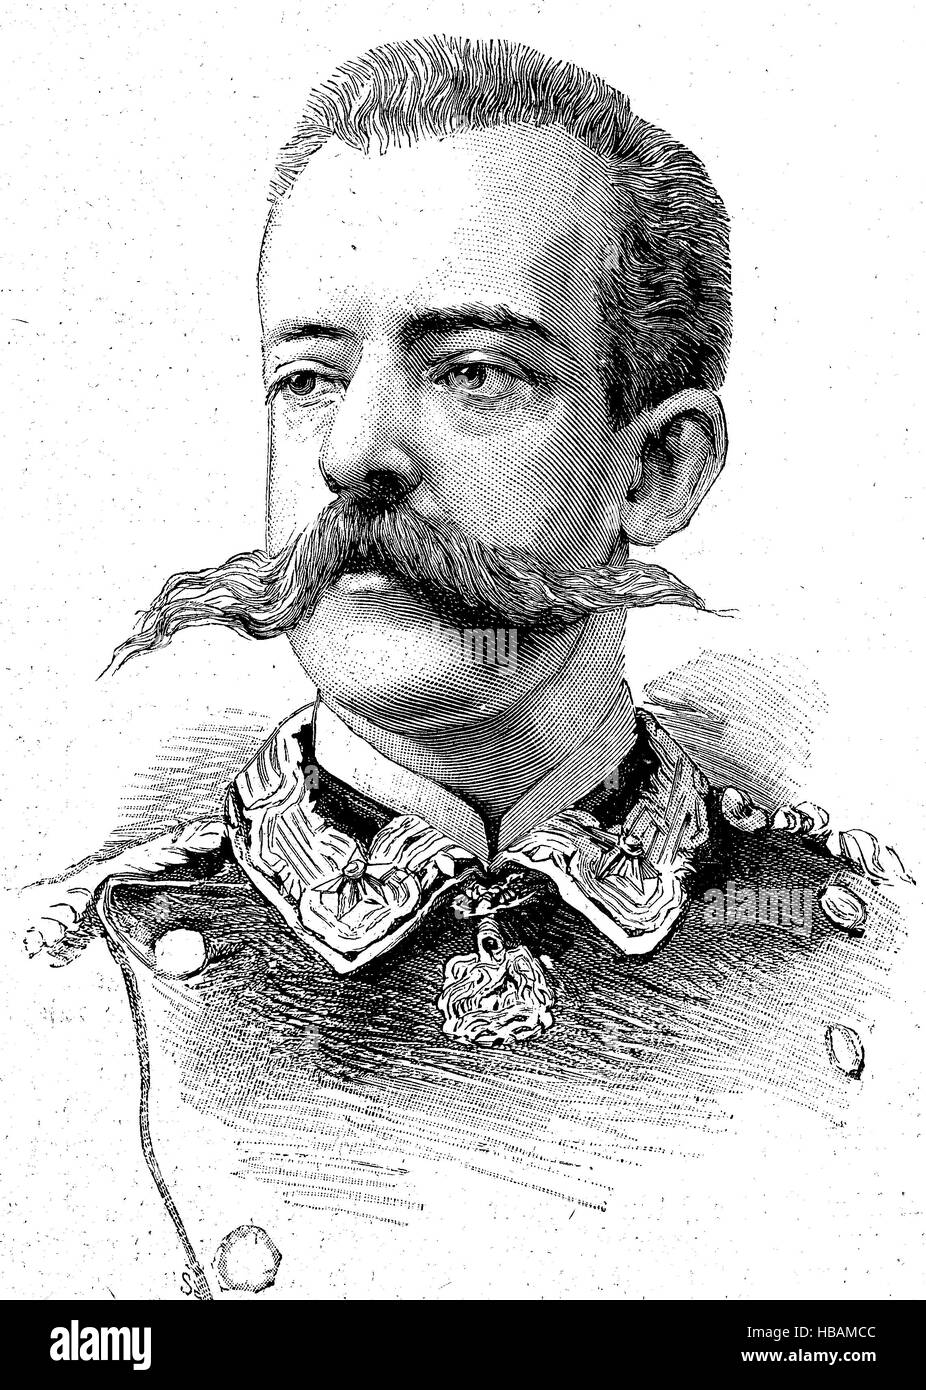 Amadeo I,  Amadeus, 30 May 1845 – 18 January 1890, was the only King of Spain from the House of Savoy. He was the second son of King Vittorio Emanuele II of Italy and was known for most of his life as the Duke of Aosta, hictorical illustration from 1880 Stock Photo